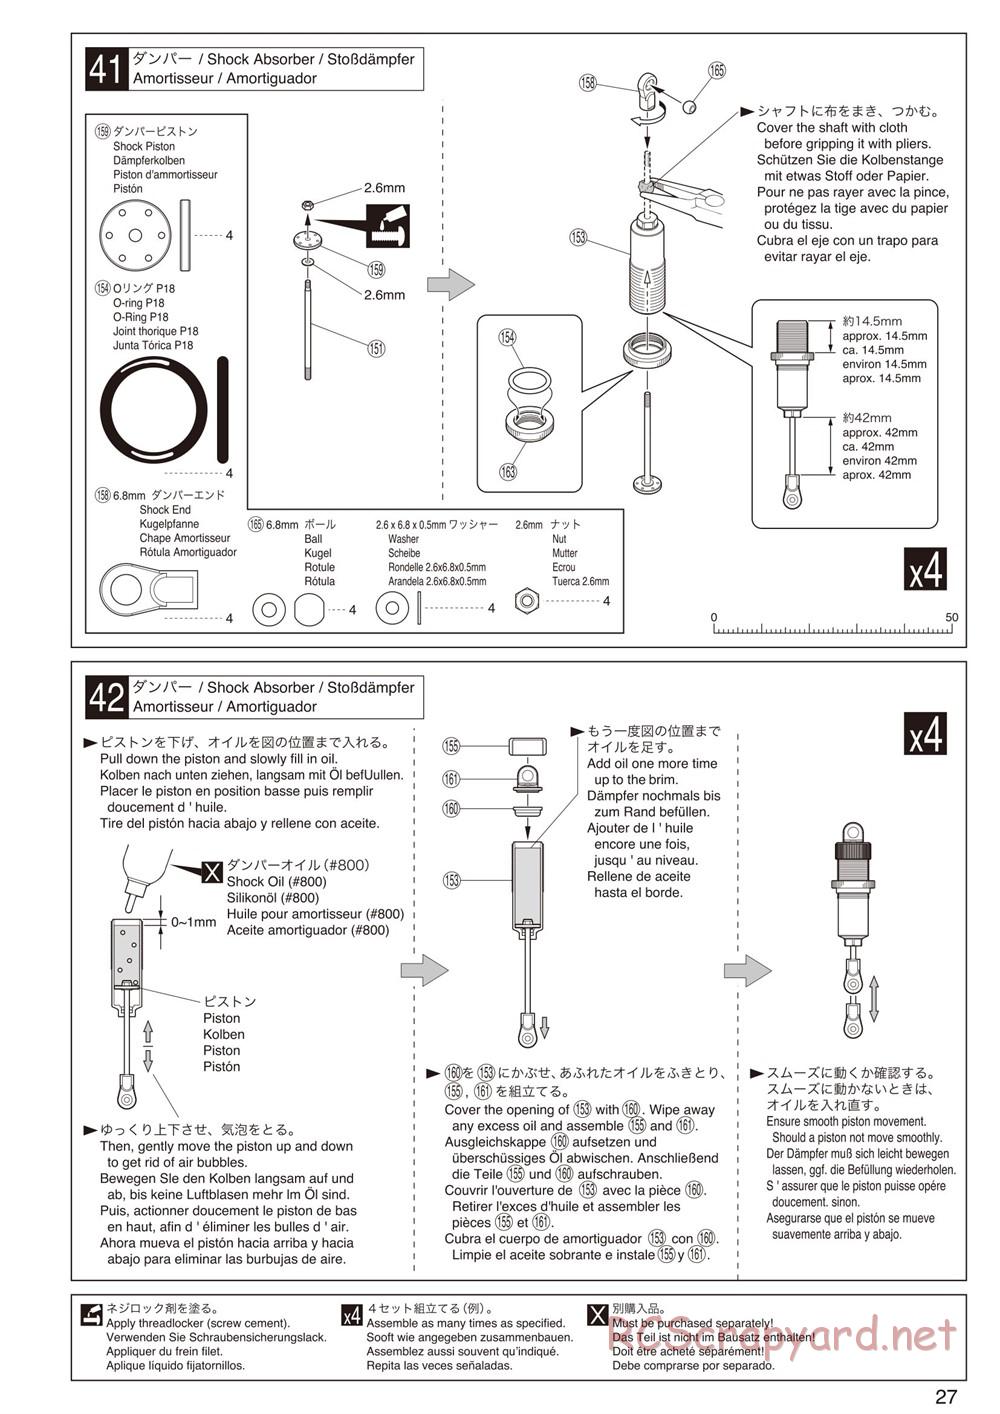 Kyosho - Inferno Neo ST - Manual - Page 27